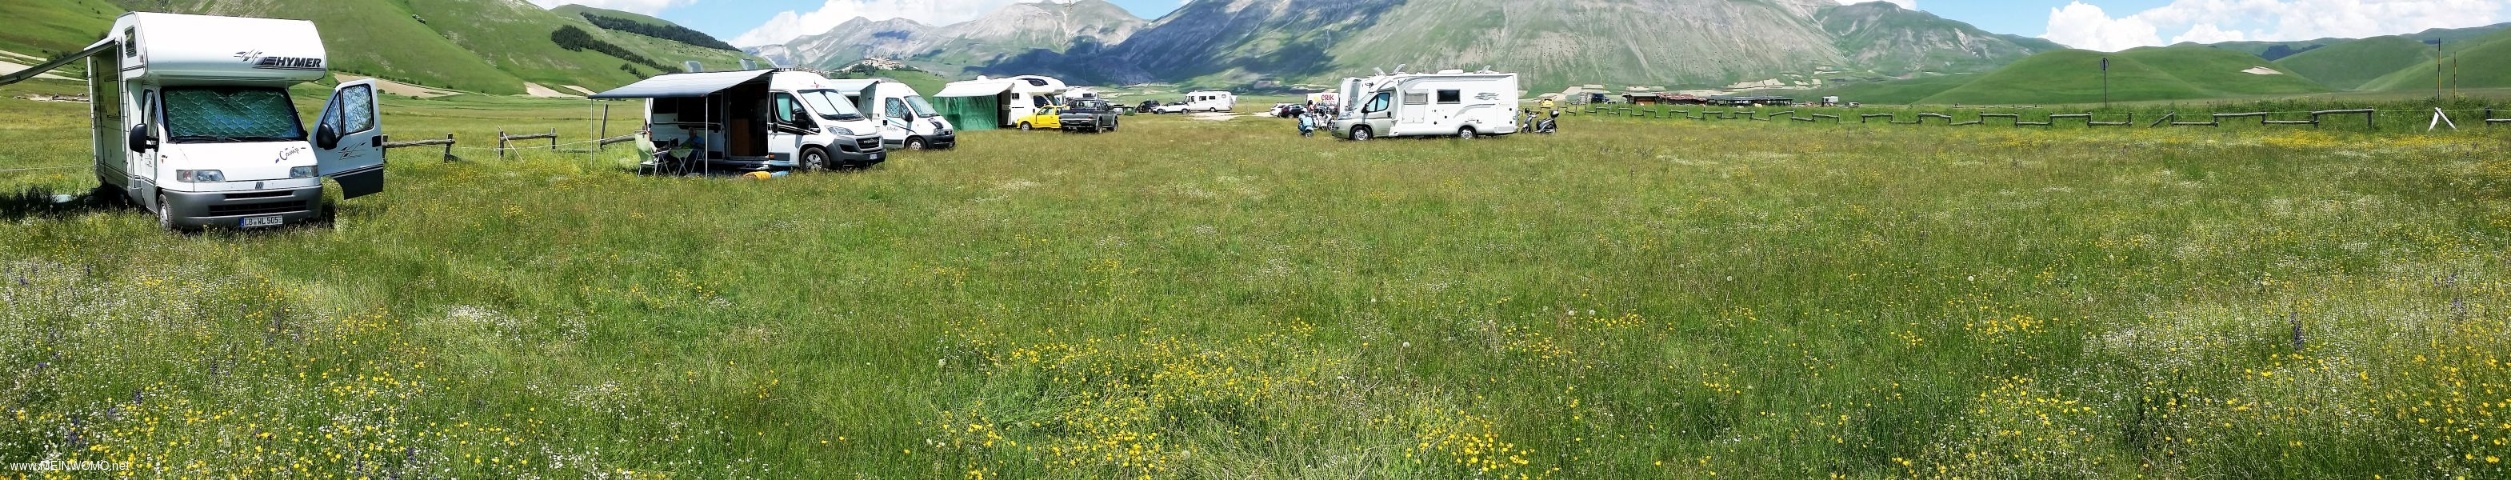  As a parking lot serves a large meadow, which was not so heavily visited in June.